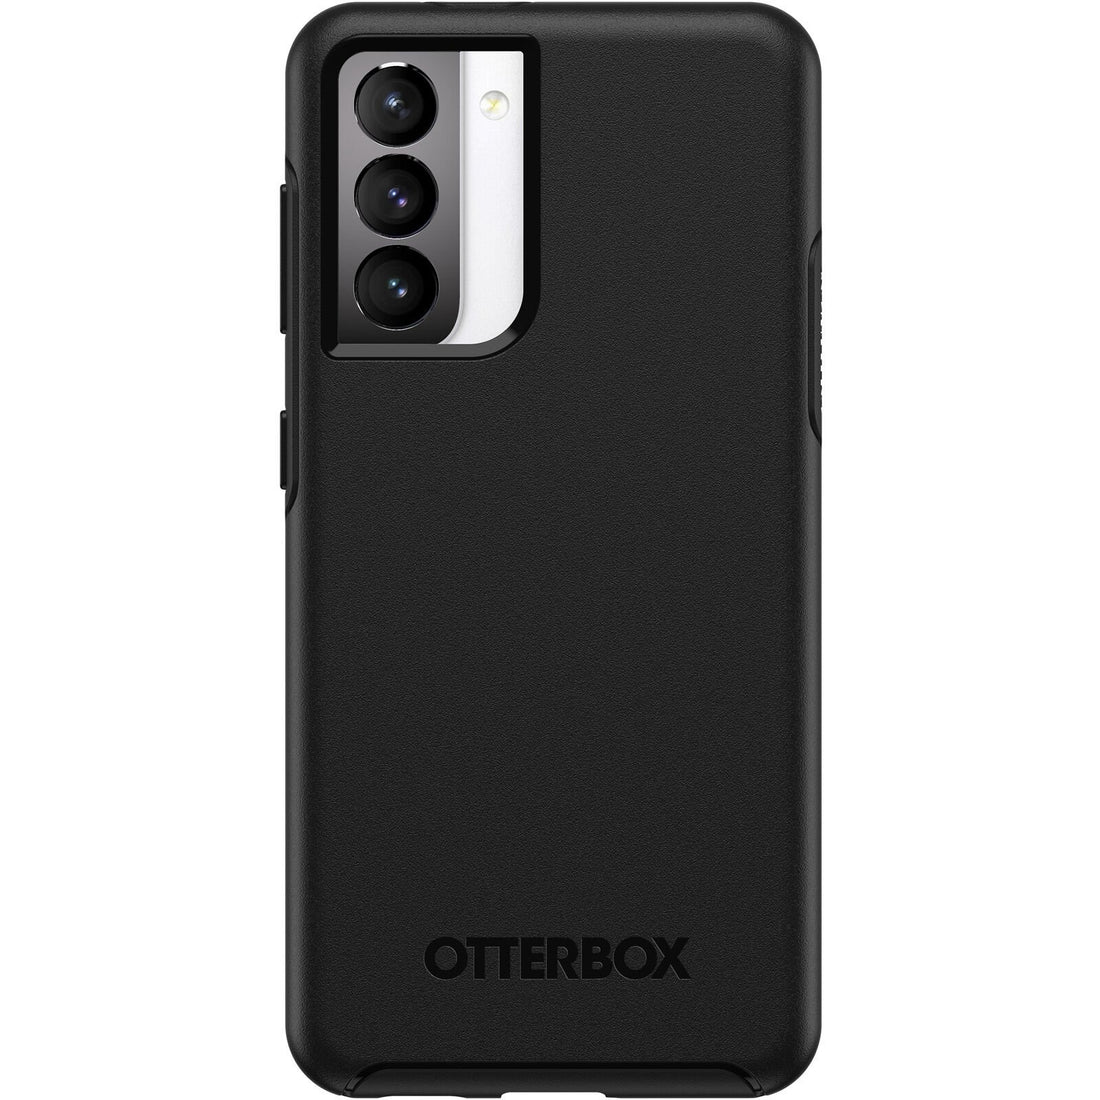 OtterBox SYMMETRY SERIES Case for Samsung Galaxy S21 5G - Black (Certified Refurbished)